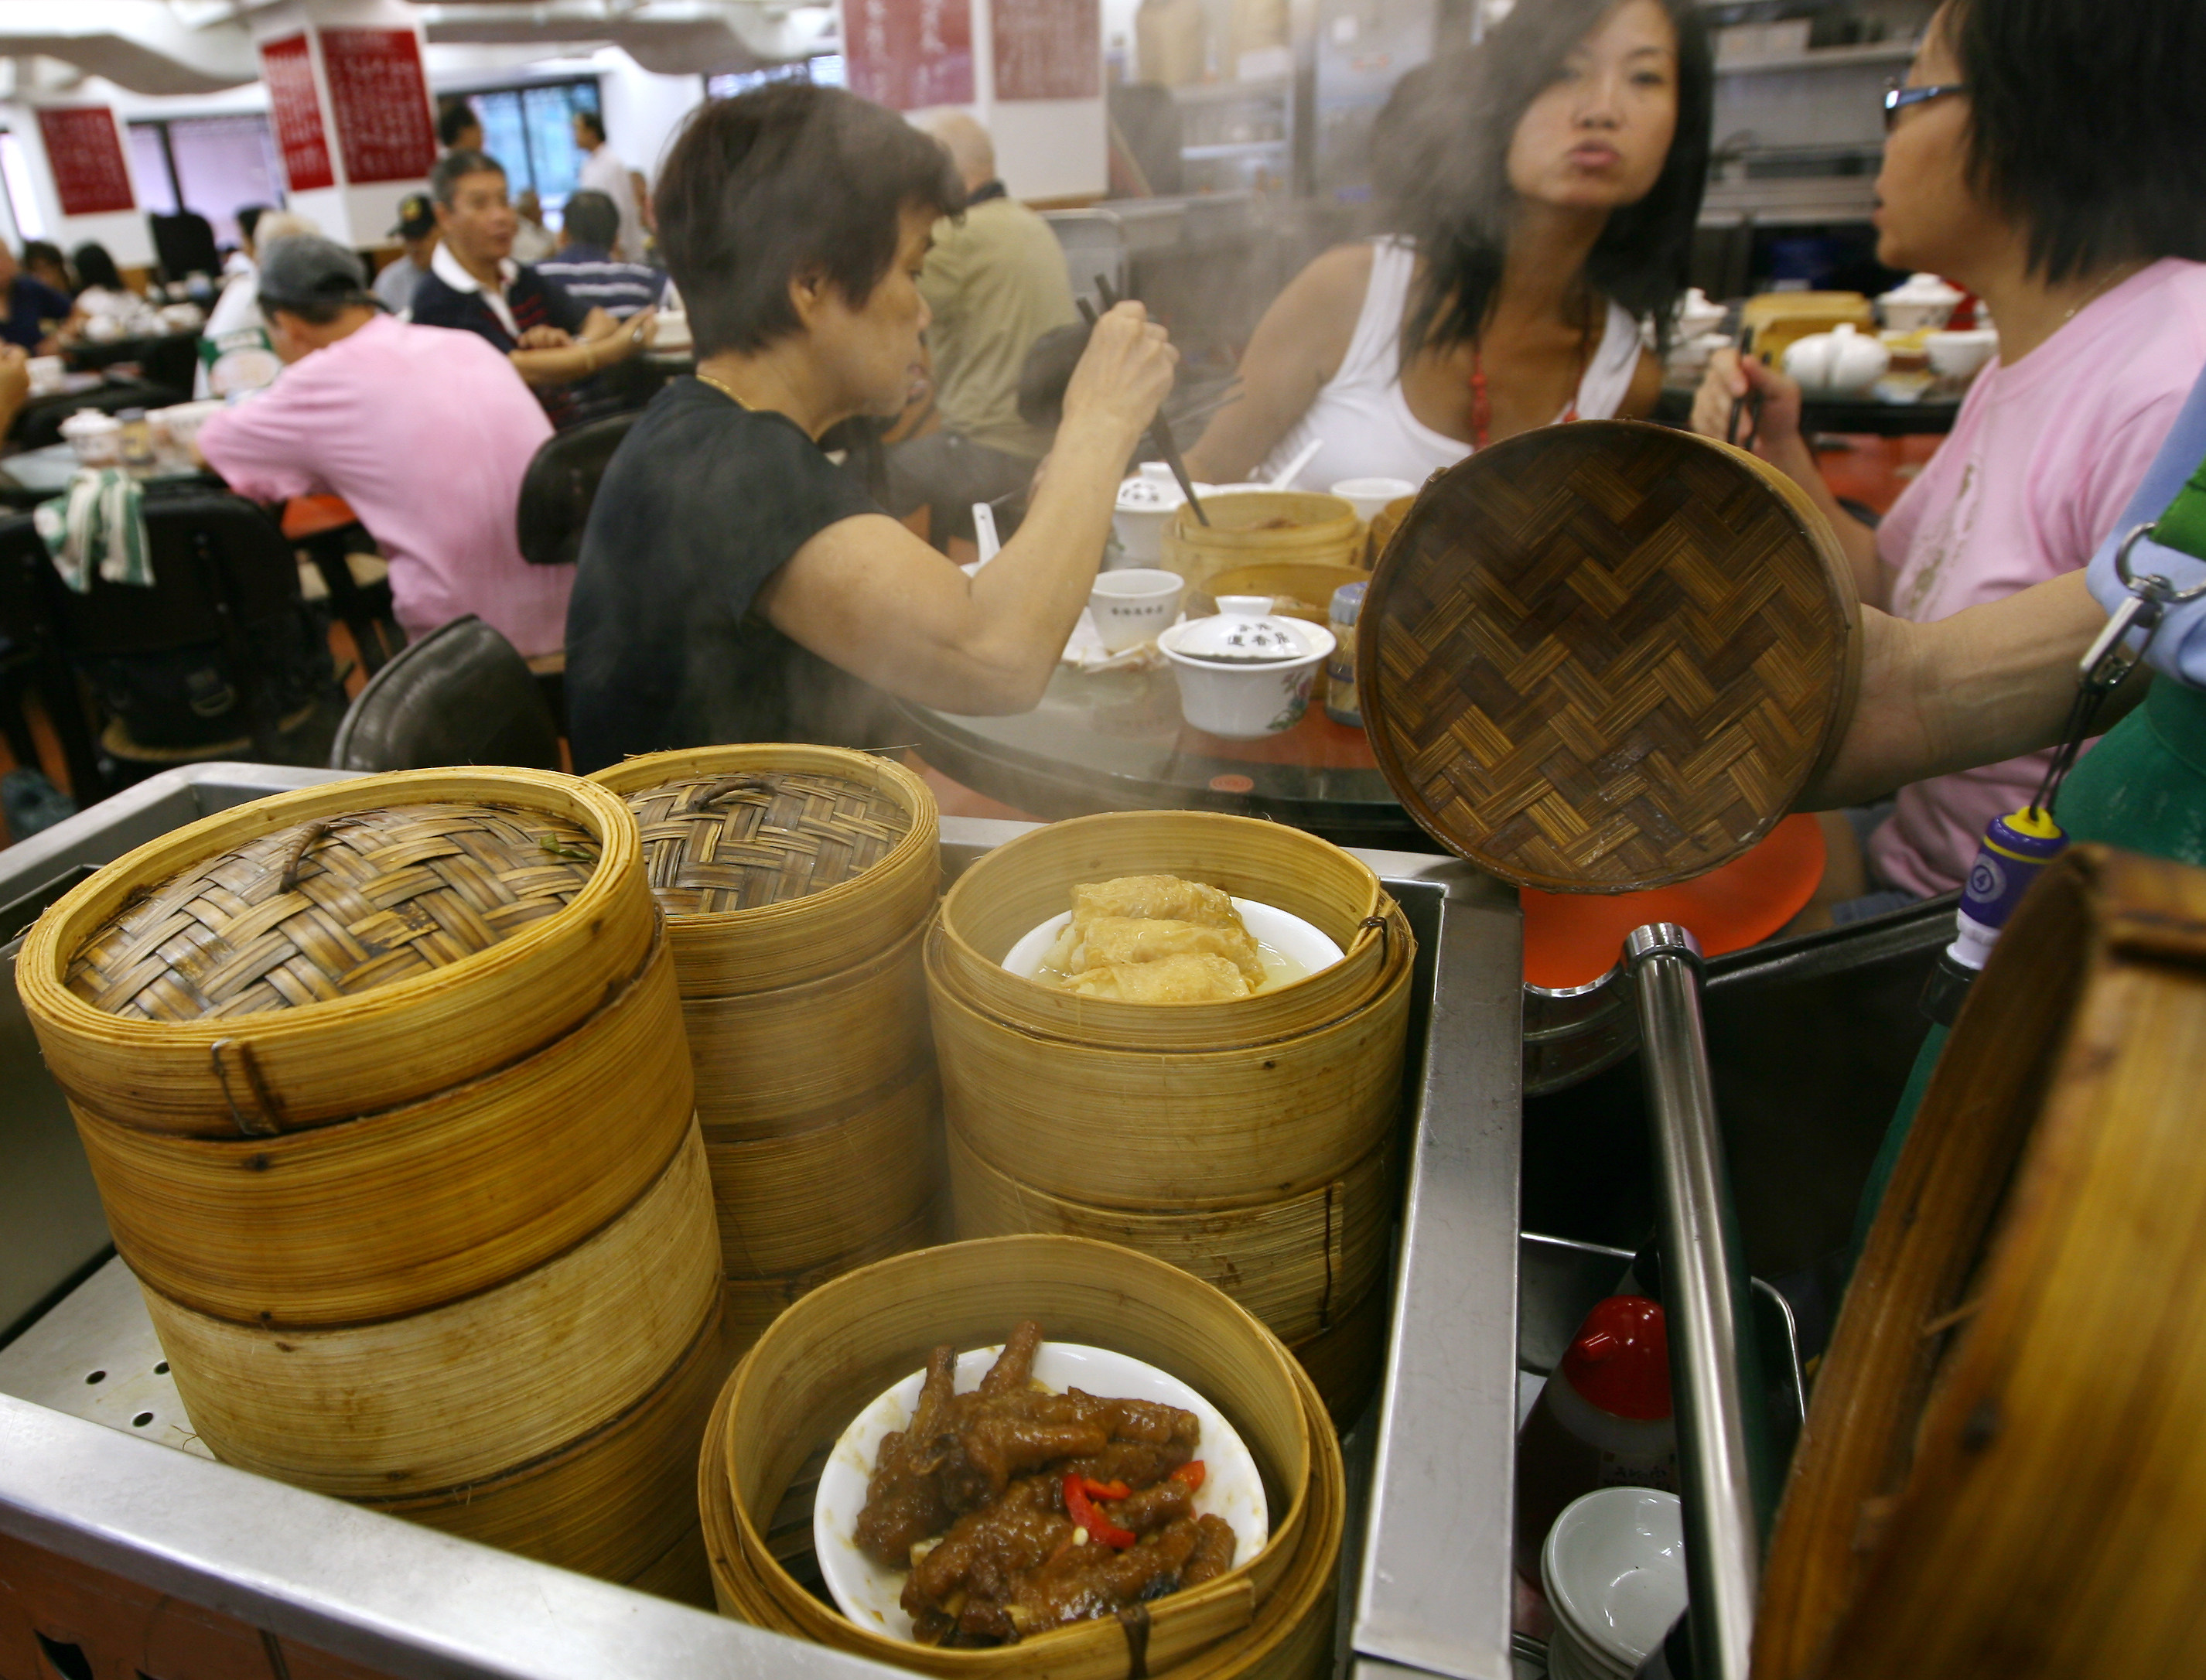 For an authentic Hong Kong dining experience with “aunties pushing carts full of steaming delicious dim sum”, Selene Xie recommends Lin Heung Kui. Photo: SCMP